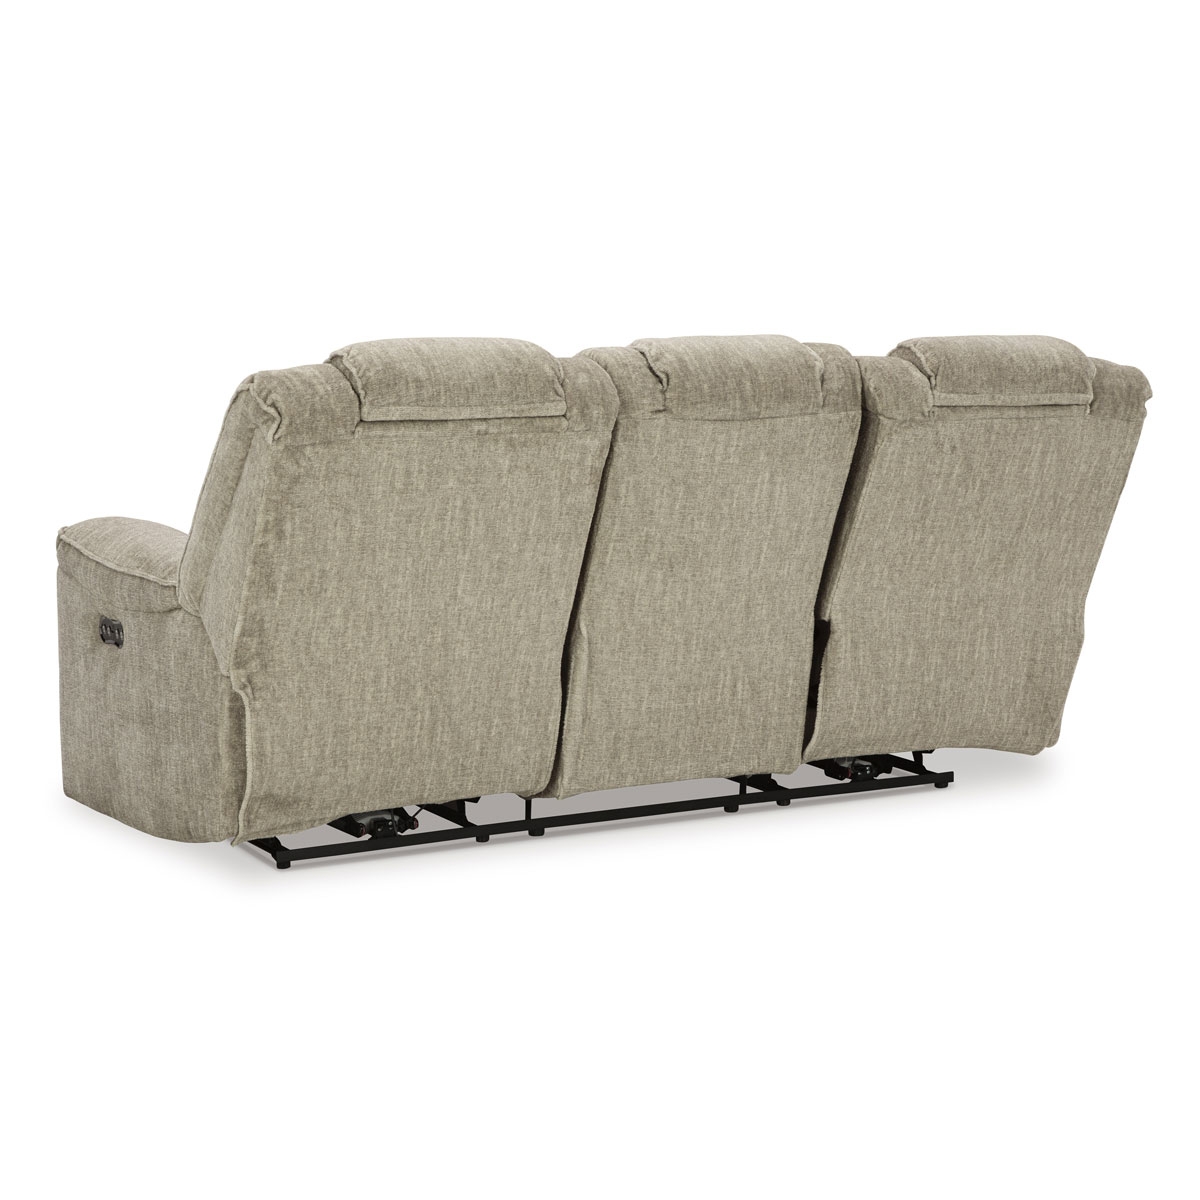 Picture of MATEO SOFA WITH POWER HEADREST